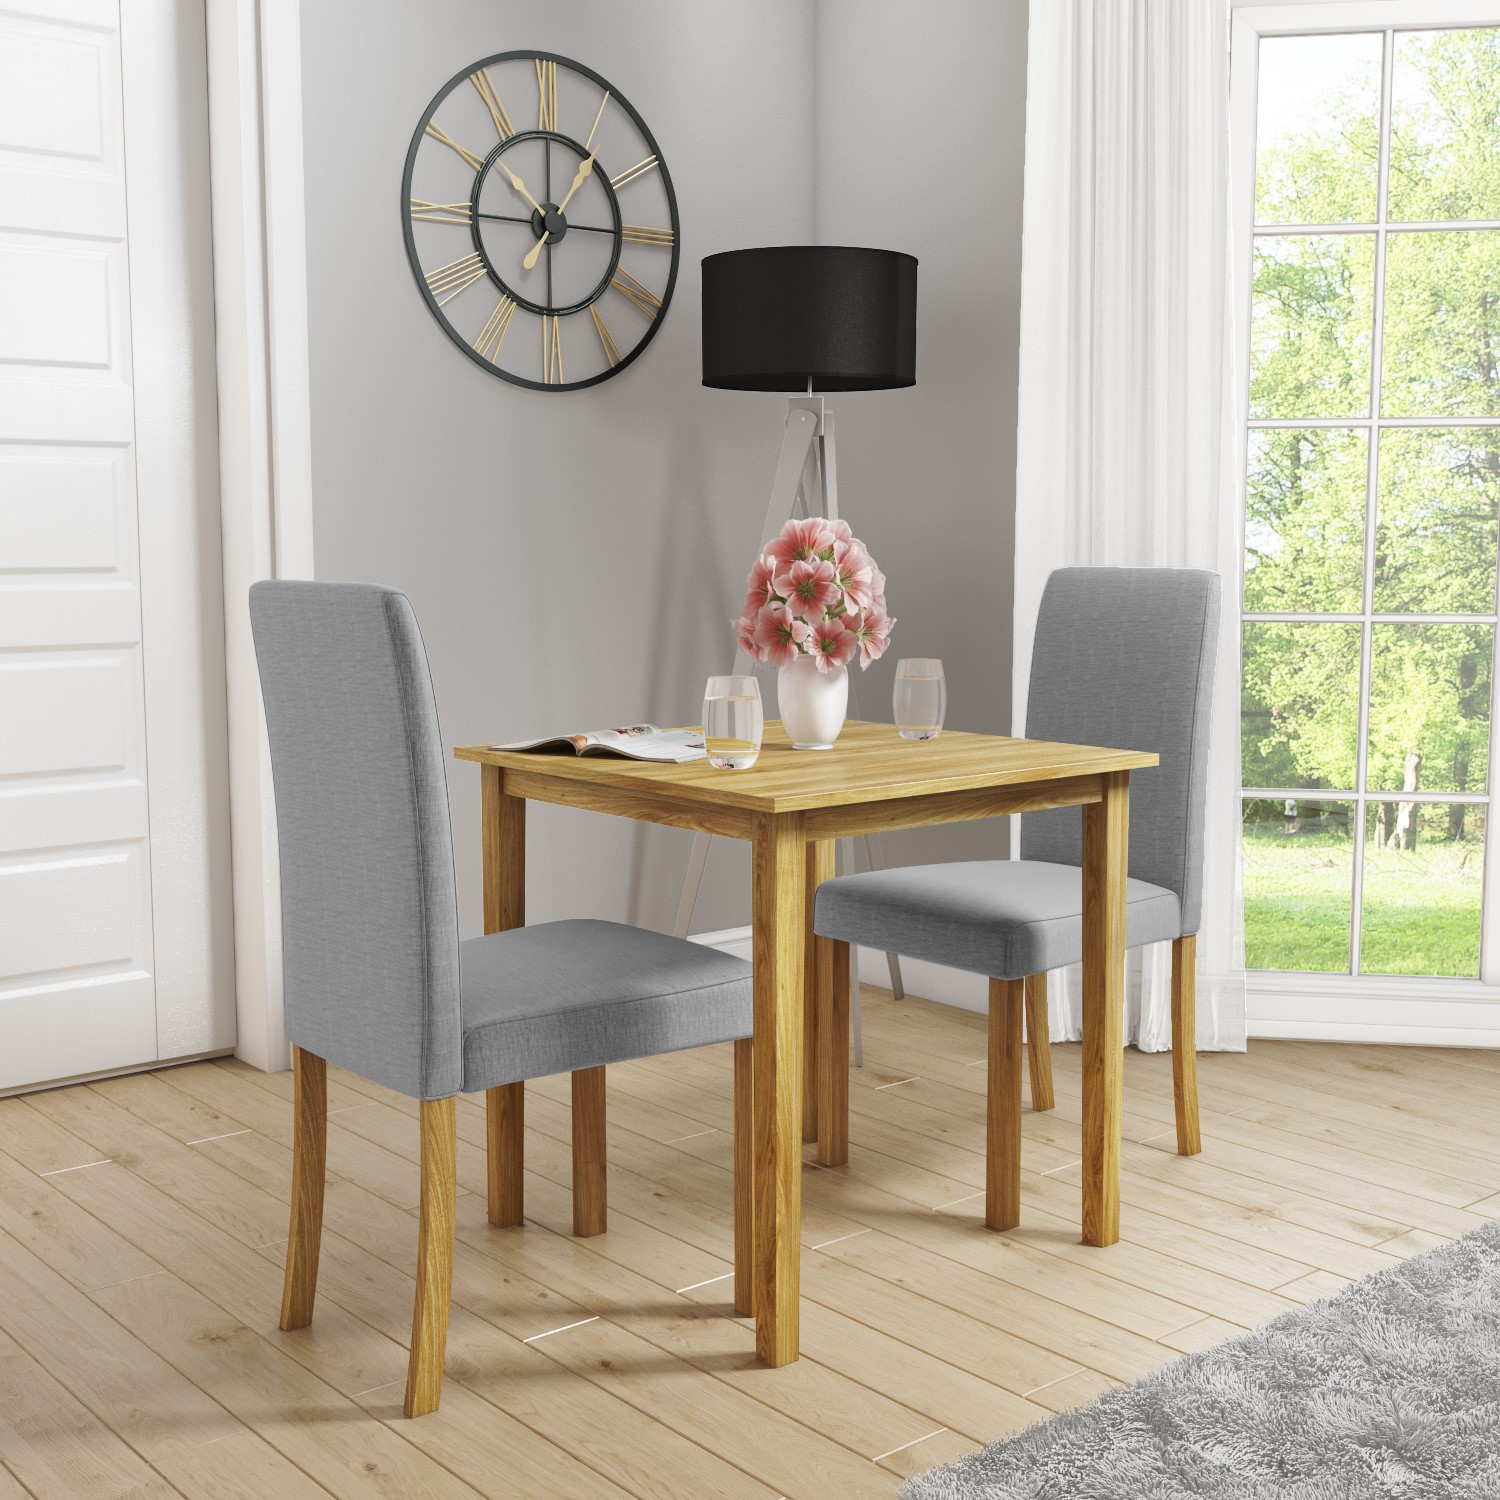 Small Dining Table With 2 Chairs - Small Dining Table And 2 Chairs In